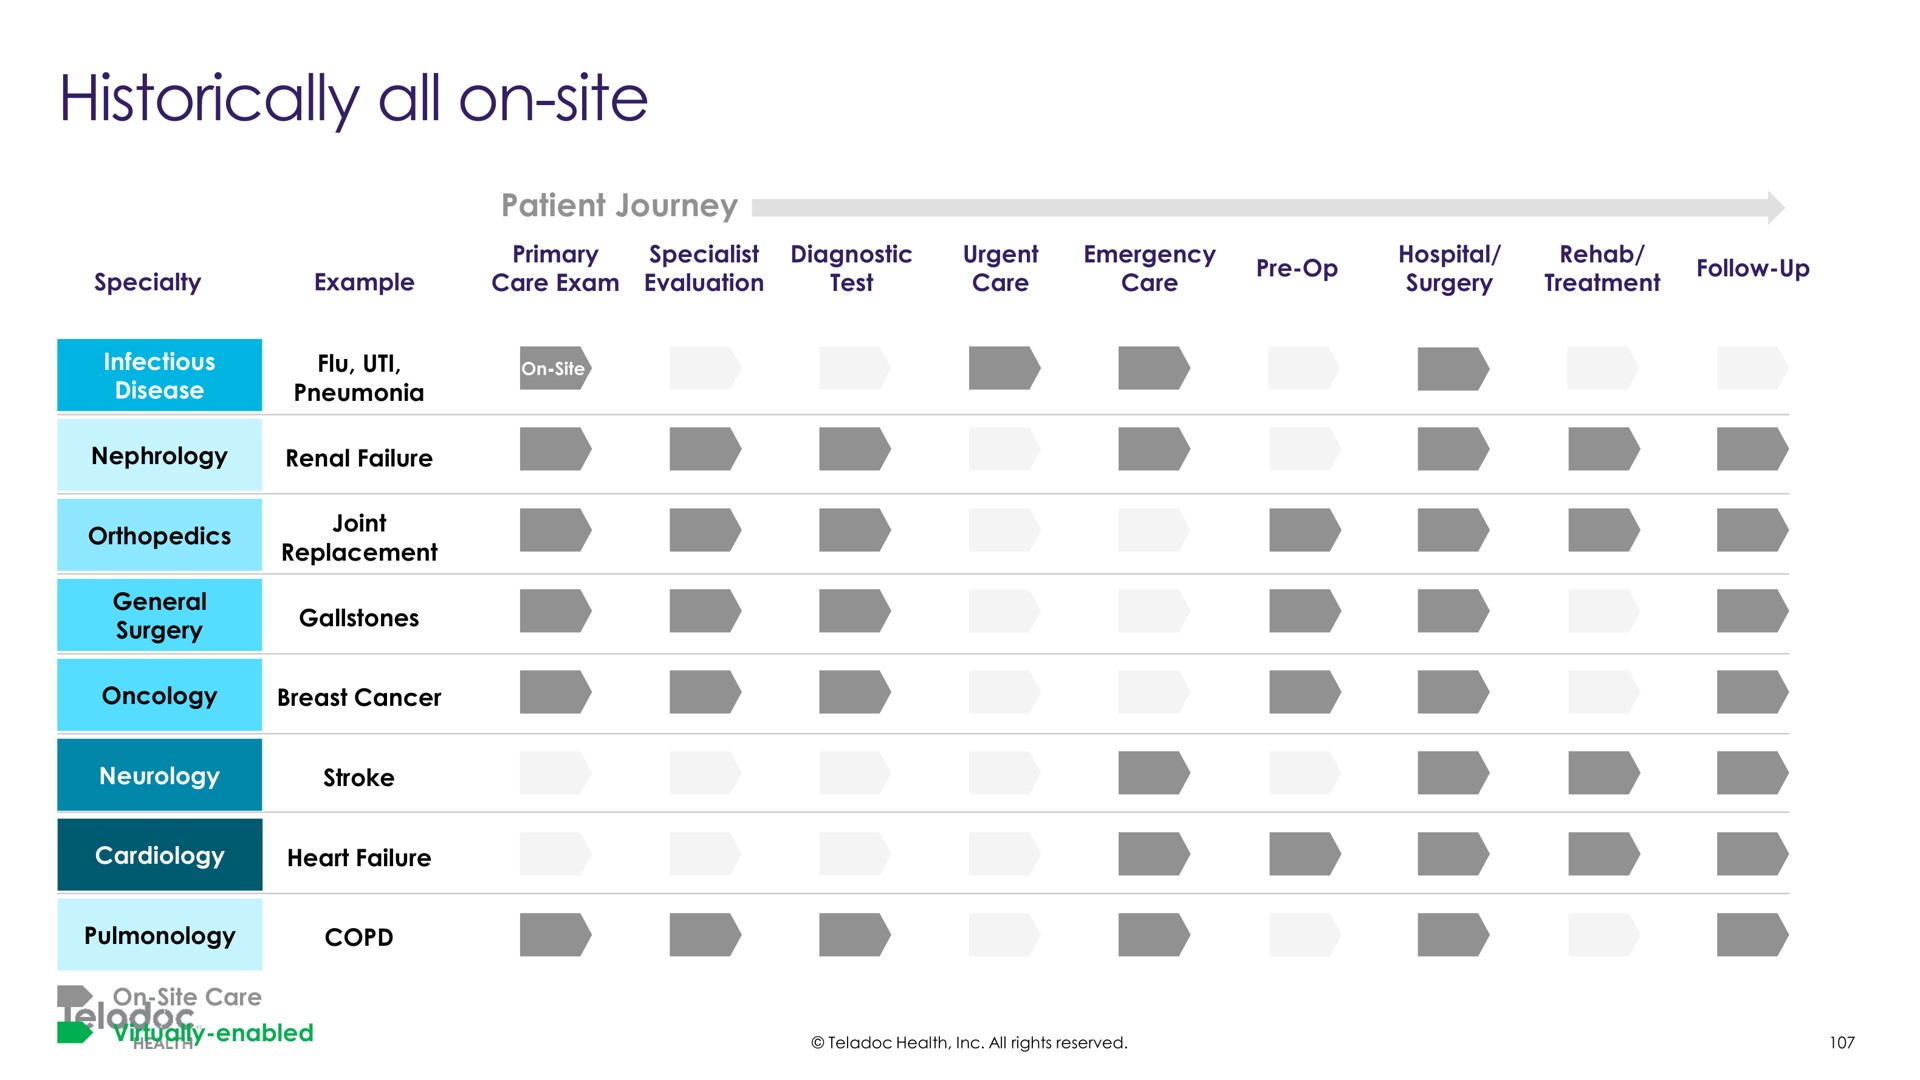 patient journey historically all on site | Teladoc